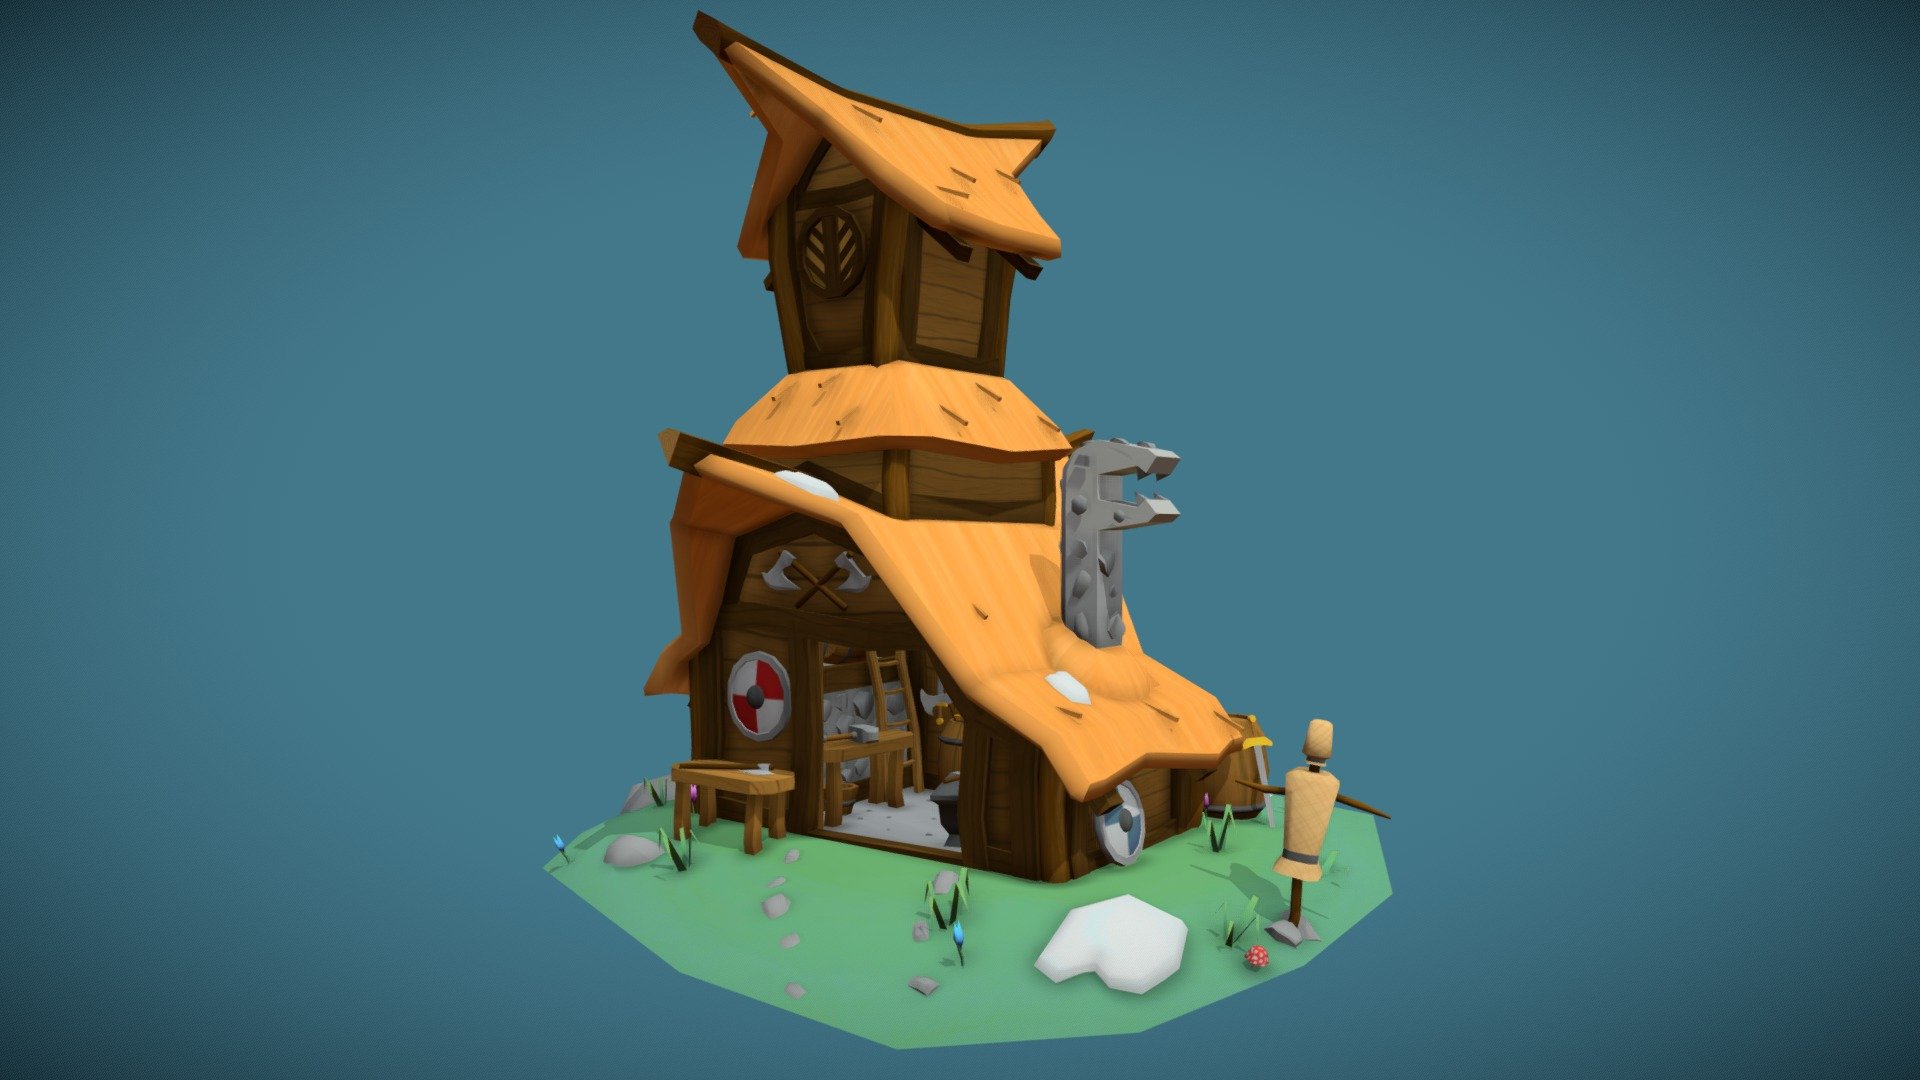 This is my exam for Game Art 1 at DAE Howest. We had to make a stylized building with a clear function and set civilisation. I chose for a viking weaponsmith.
This was modeled using 3DS Max and textured with Photoshop 3d model